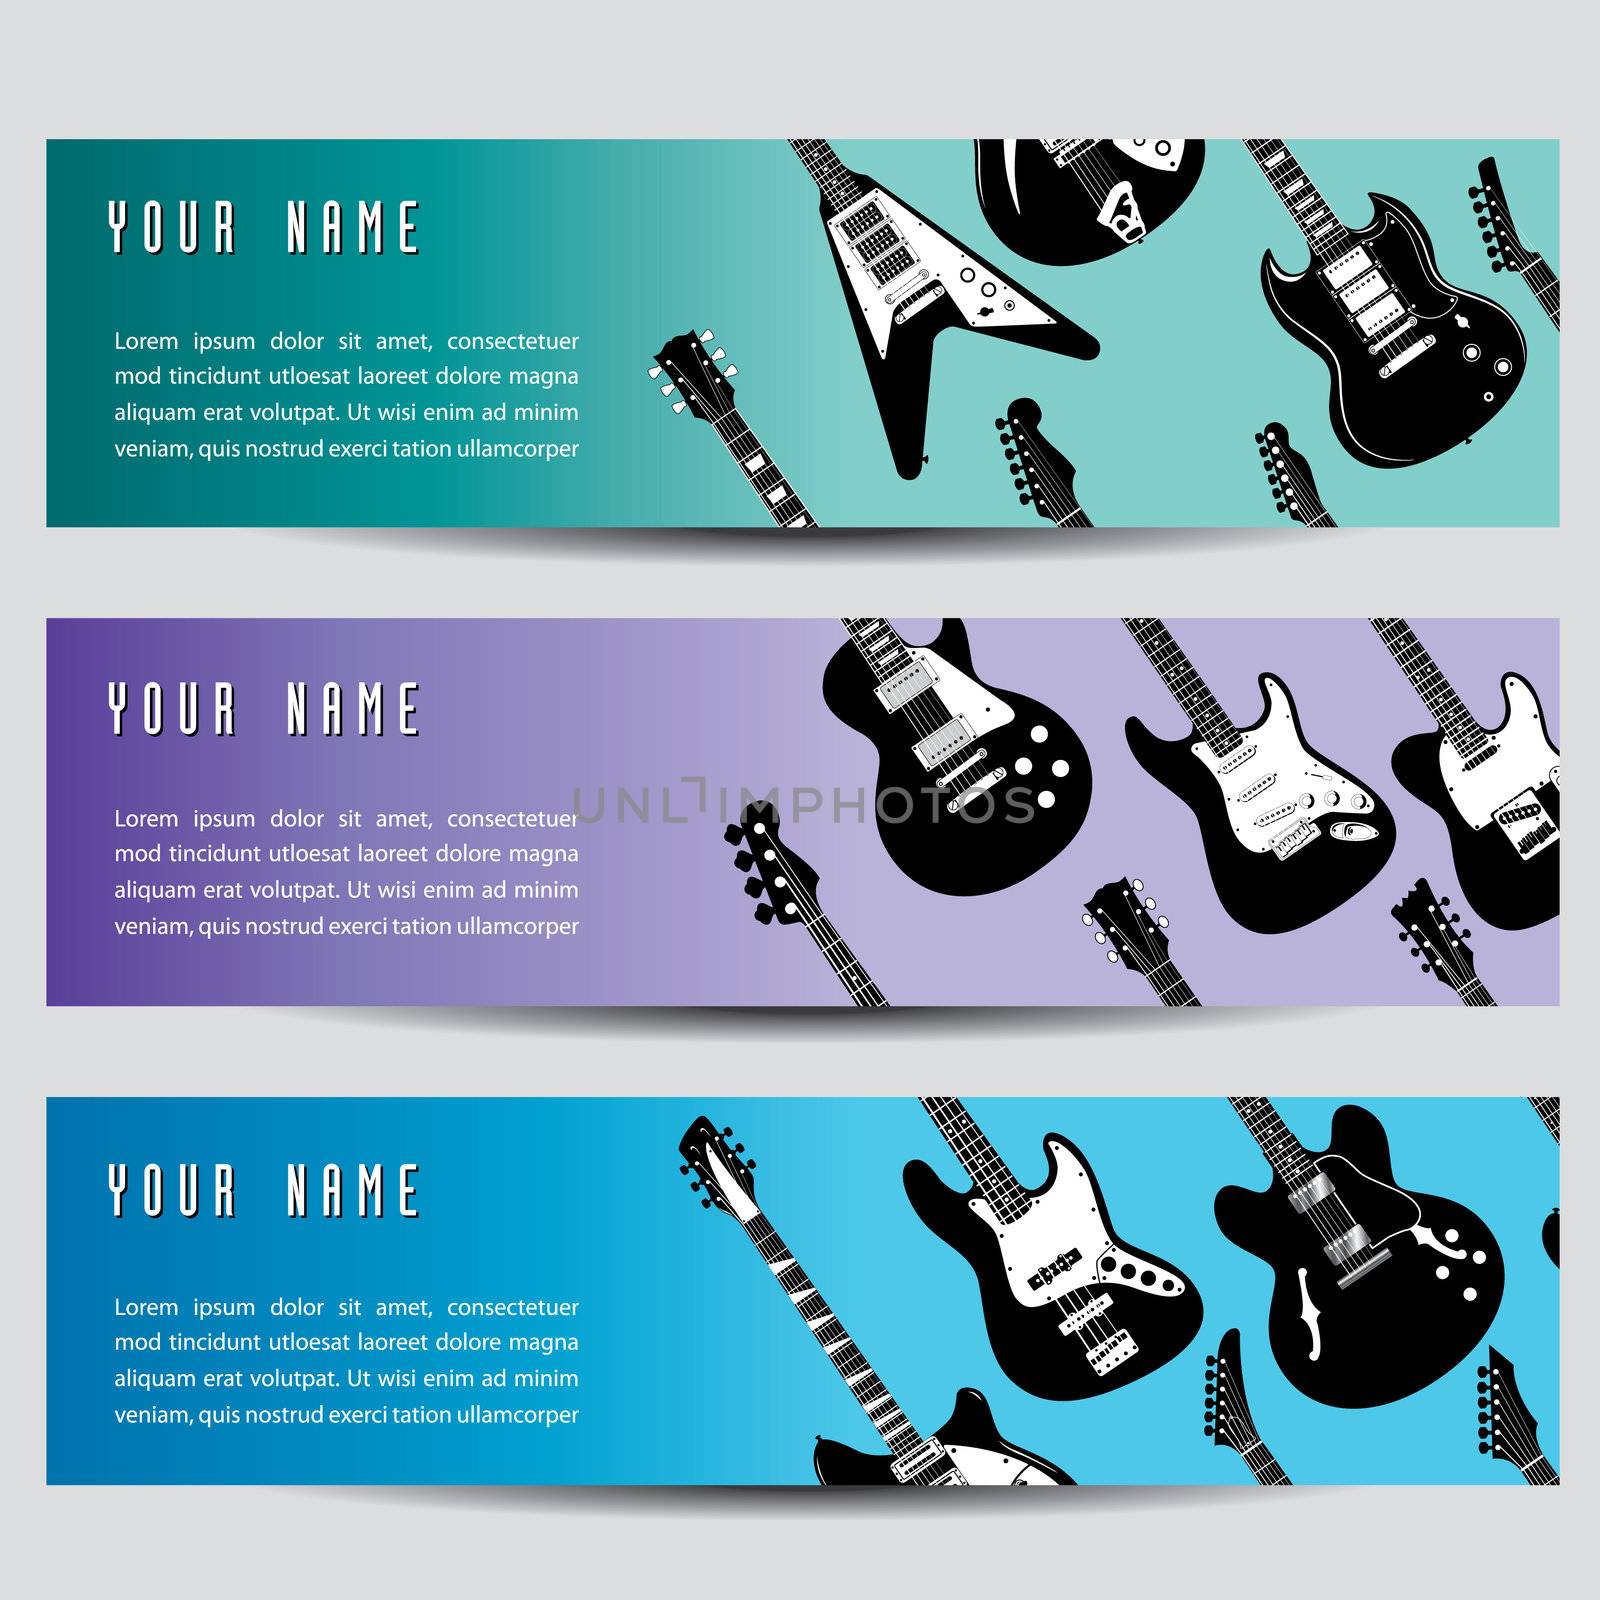 A set of three guitar banners by mike301